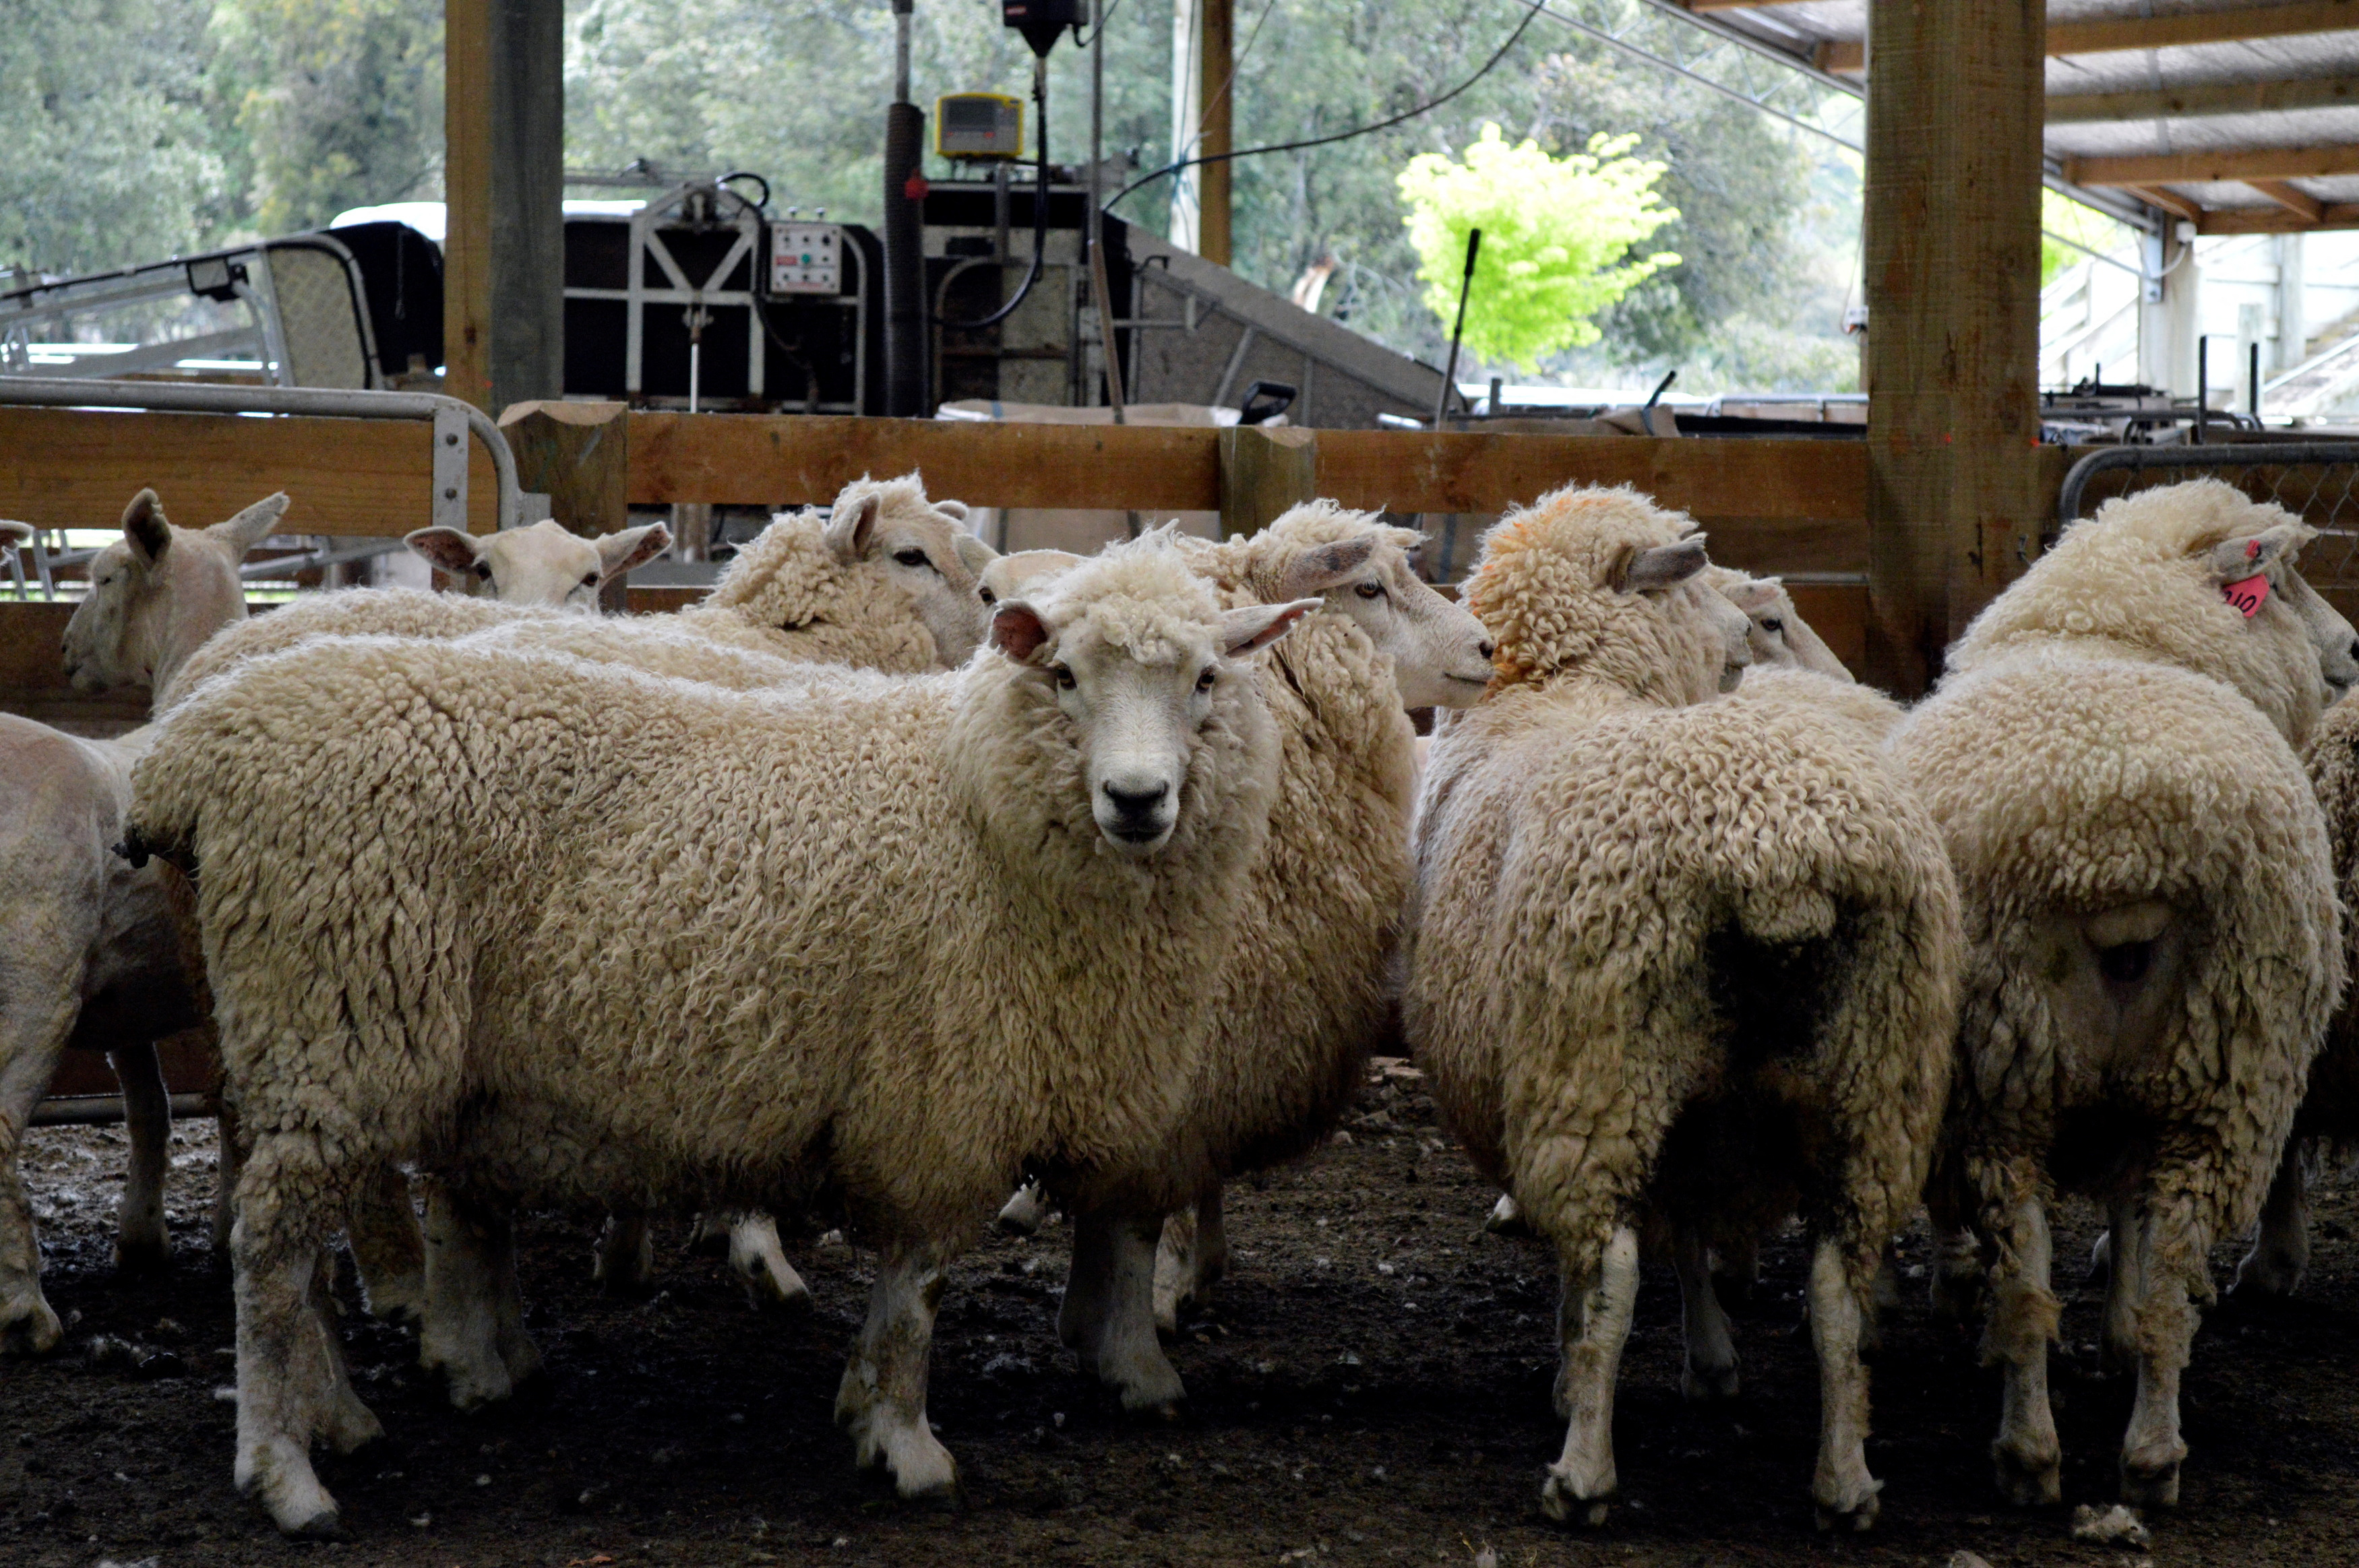 Sheep ready to be shorn are pictured on the property of sheep farmer Roger Barton in New Zealand's Wairarapa region